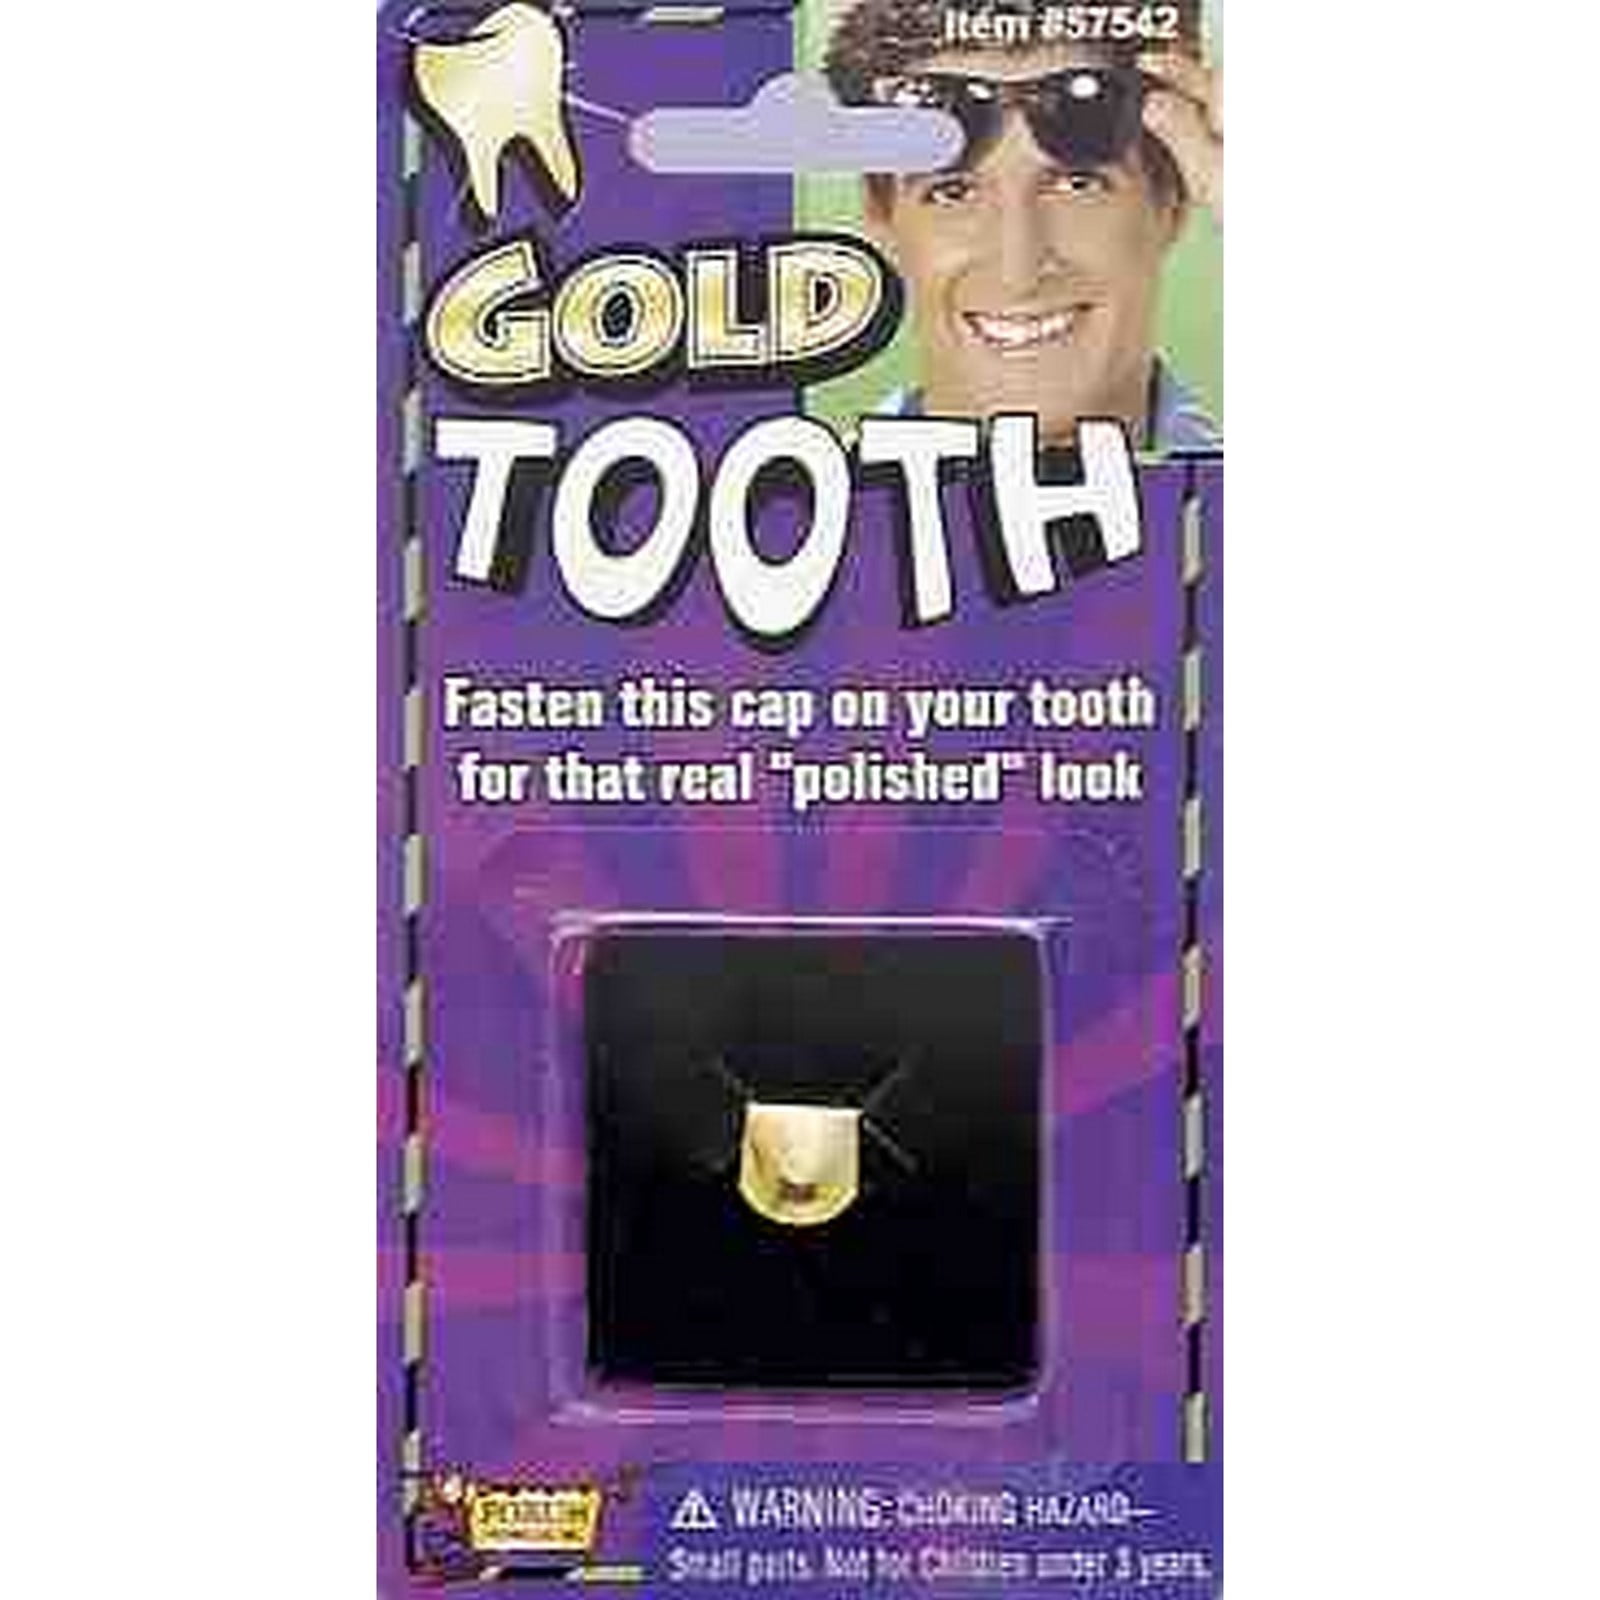 FAKE TEETH GOLD MINERS W GOLD TOOTH #1071 tooth FALSE funny costume new DRESSUP 